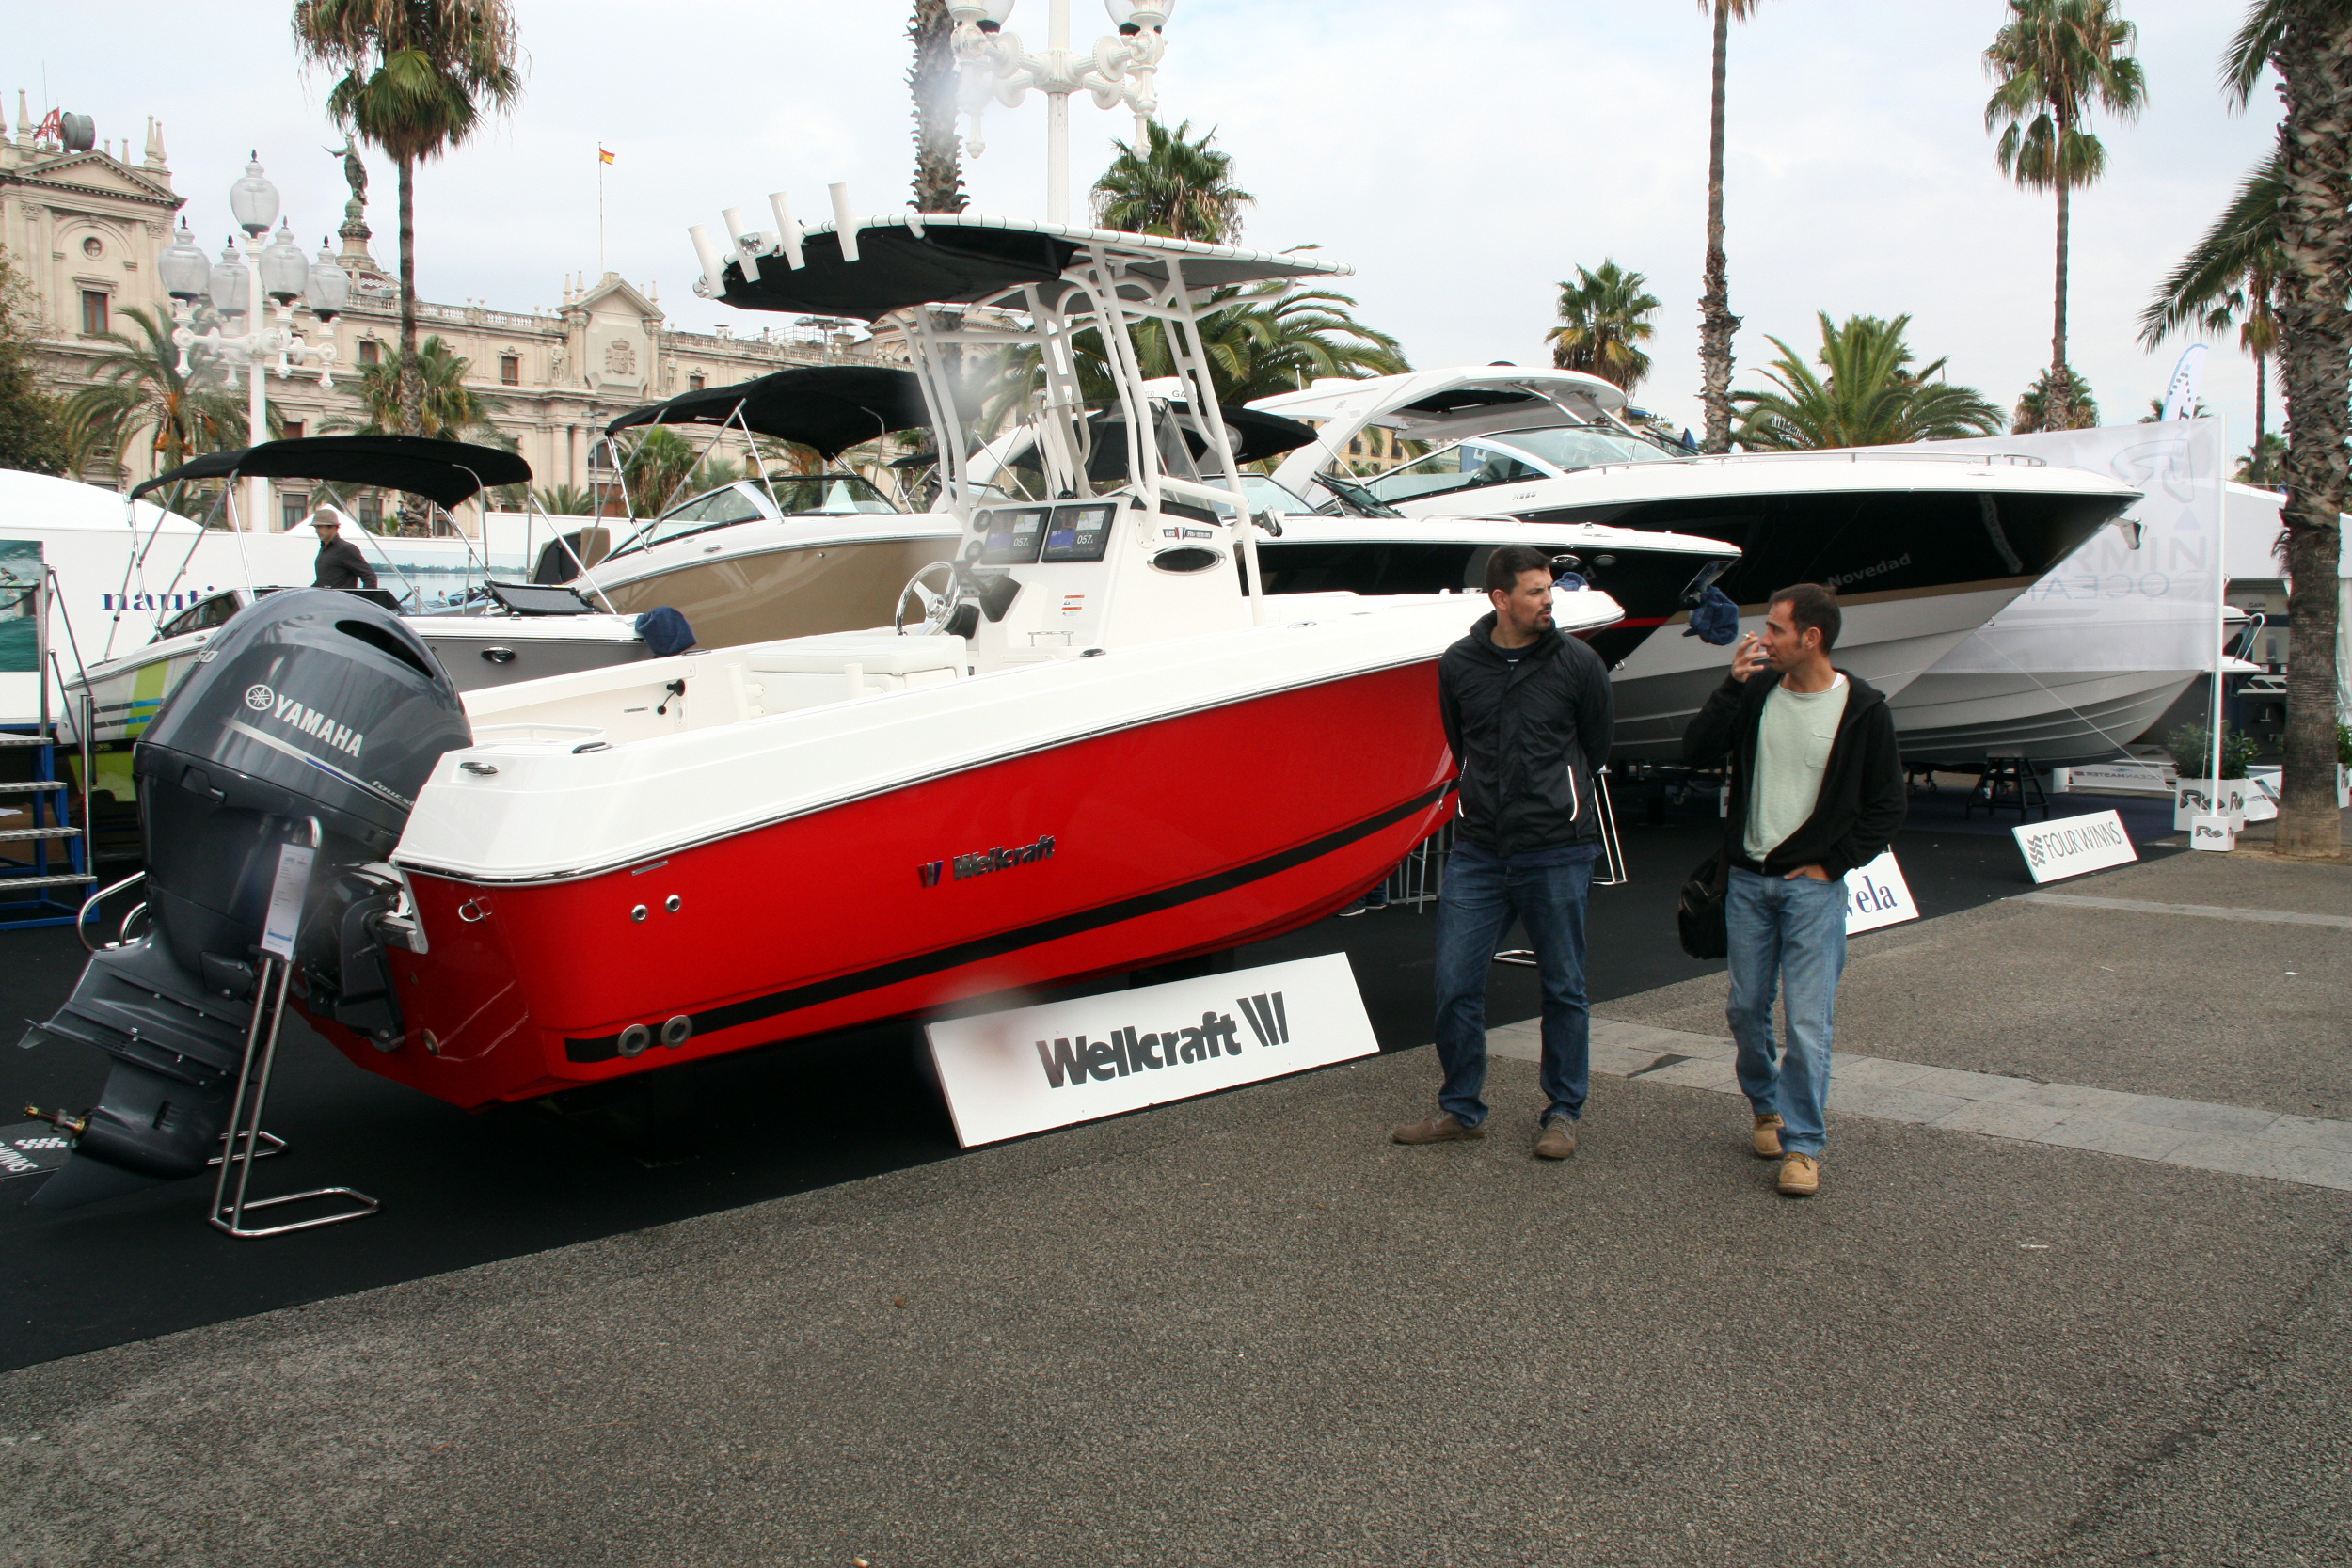 One of the boats exhibited in Barcelona International Boat Show (by ACN)